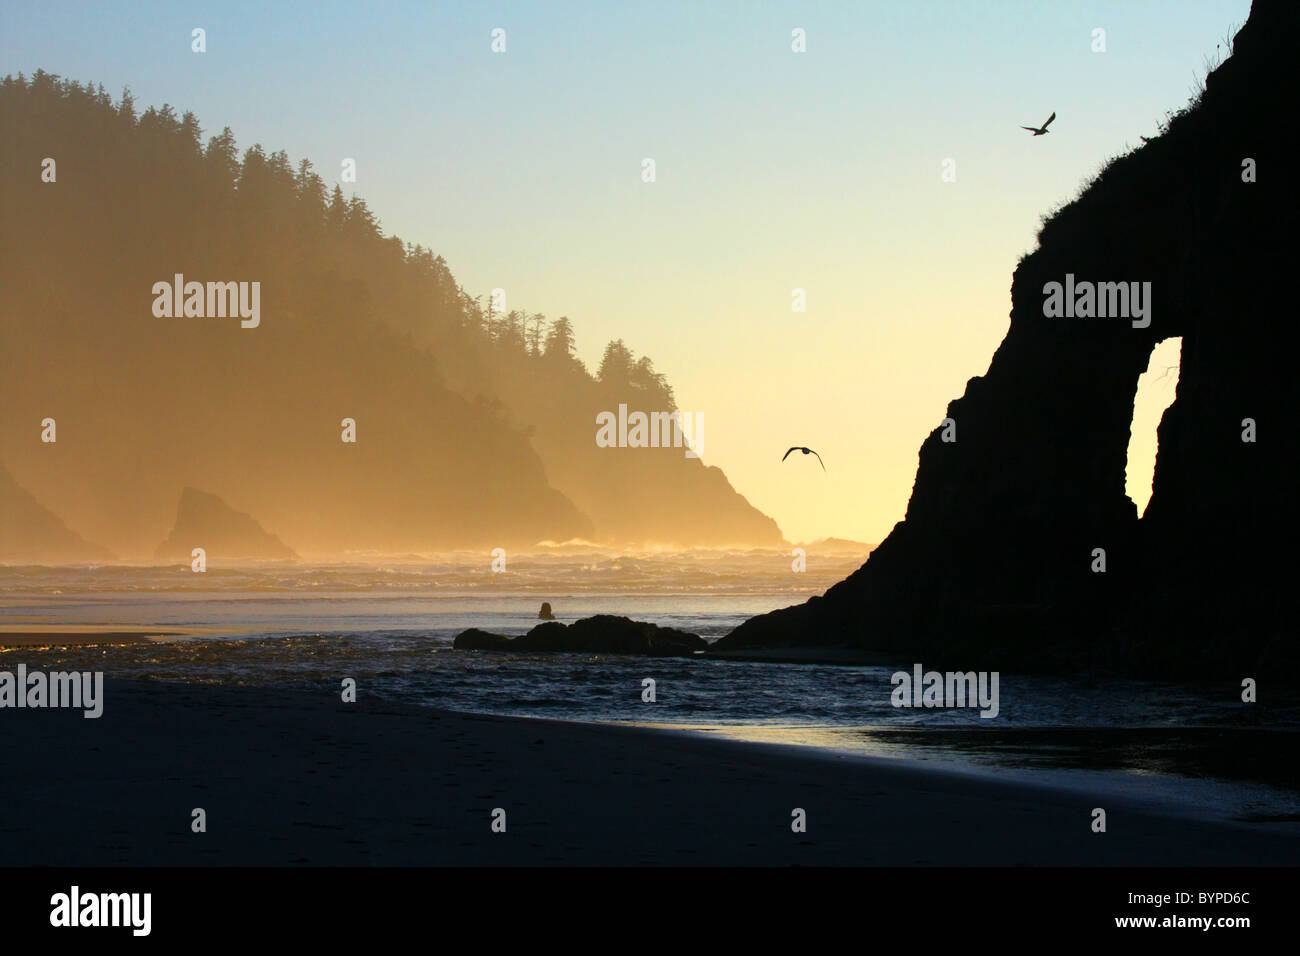 Ocean beach and shore with steep cliffs and ridges, and seagulls flying, slightly hazy.  One cliff has a see though rock arch. Stock Photo